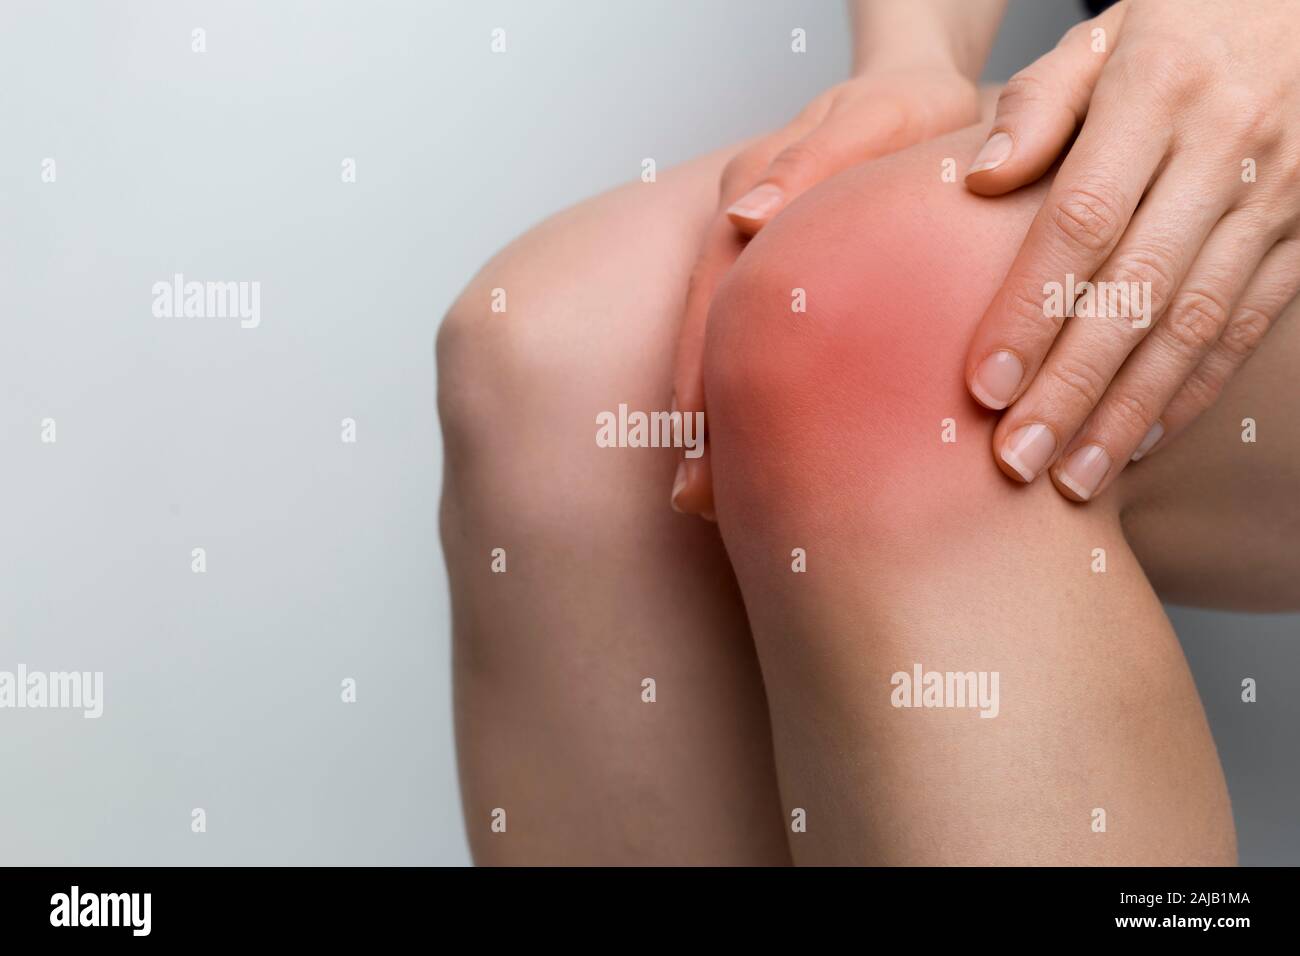 Pain in the knee joint. Meniscus. Stock Photo